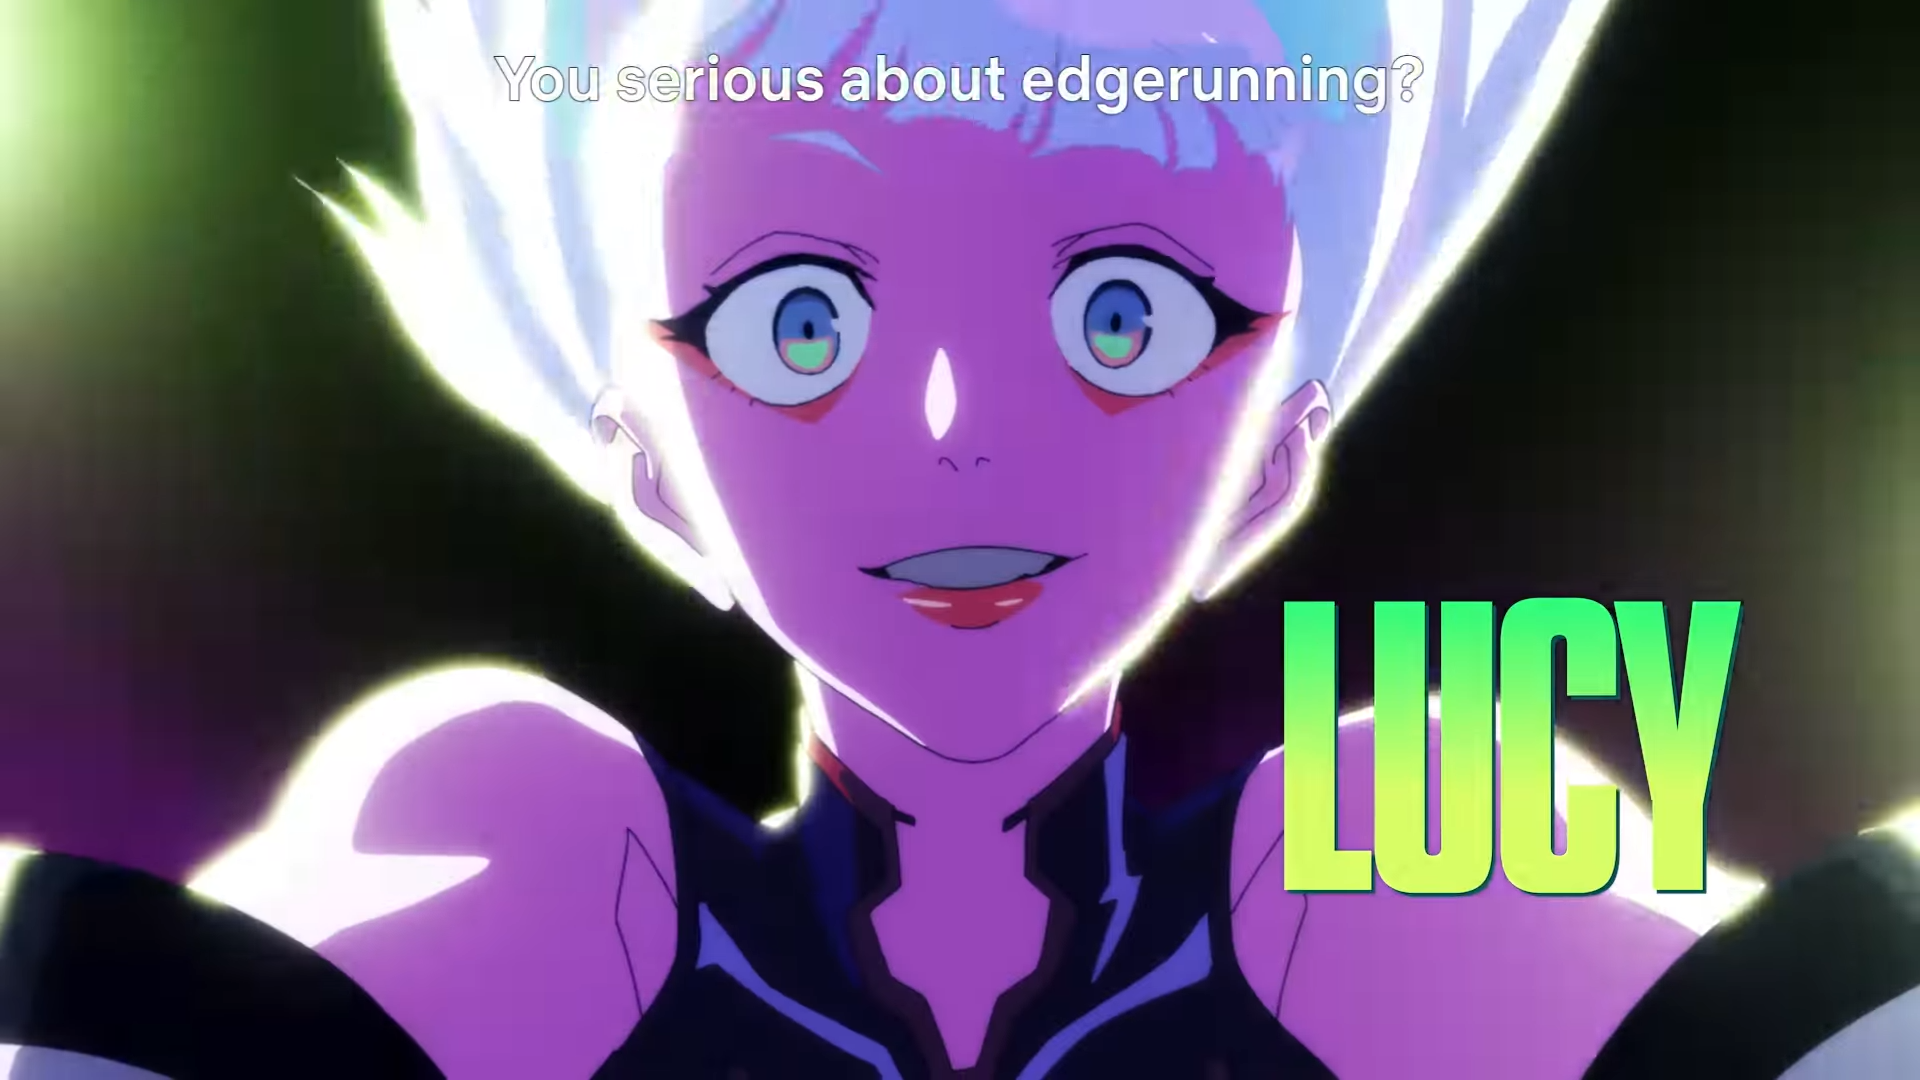 Wallpaper Cyberpunk: Edgerunners, Lucyna Kushinada, Cyberpunk Running on  the Edge for mobile and desktop, section арт, resolution 1920x1600 -  download